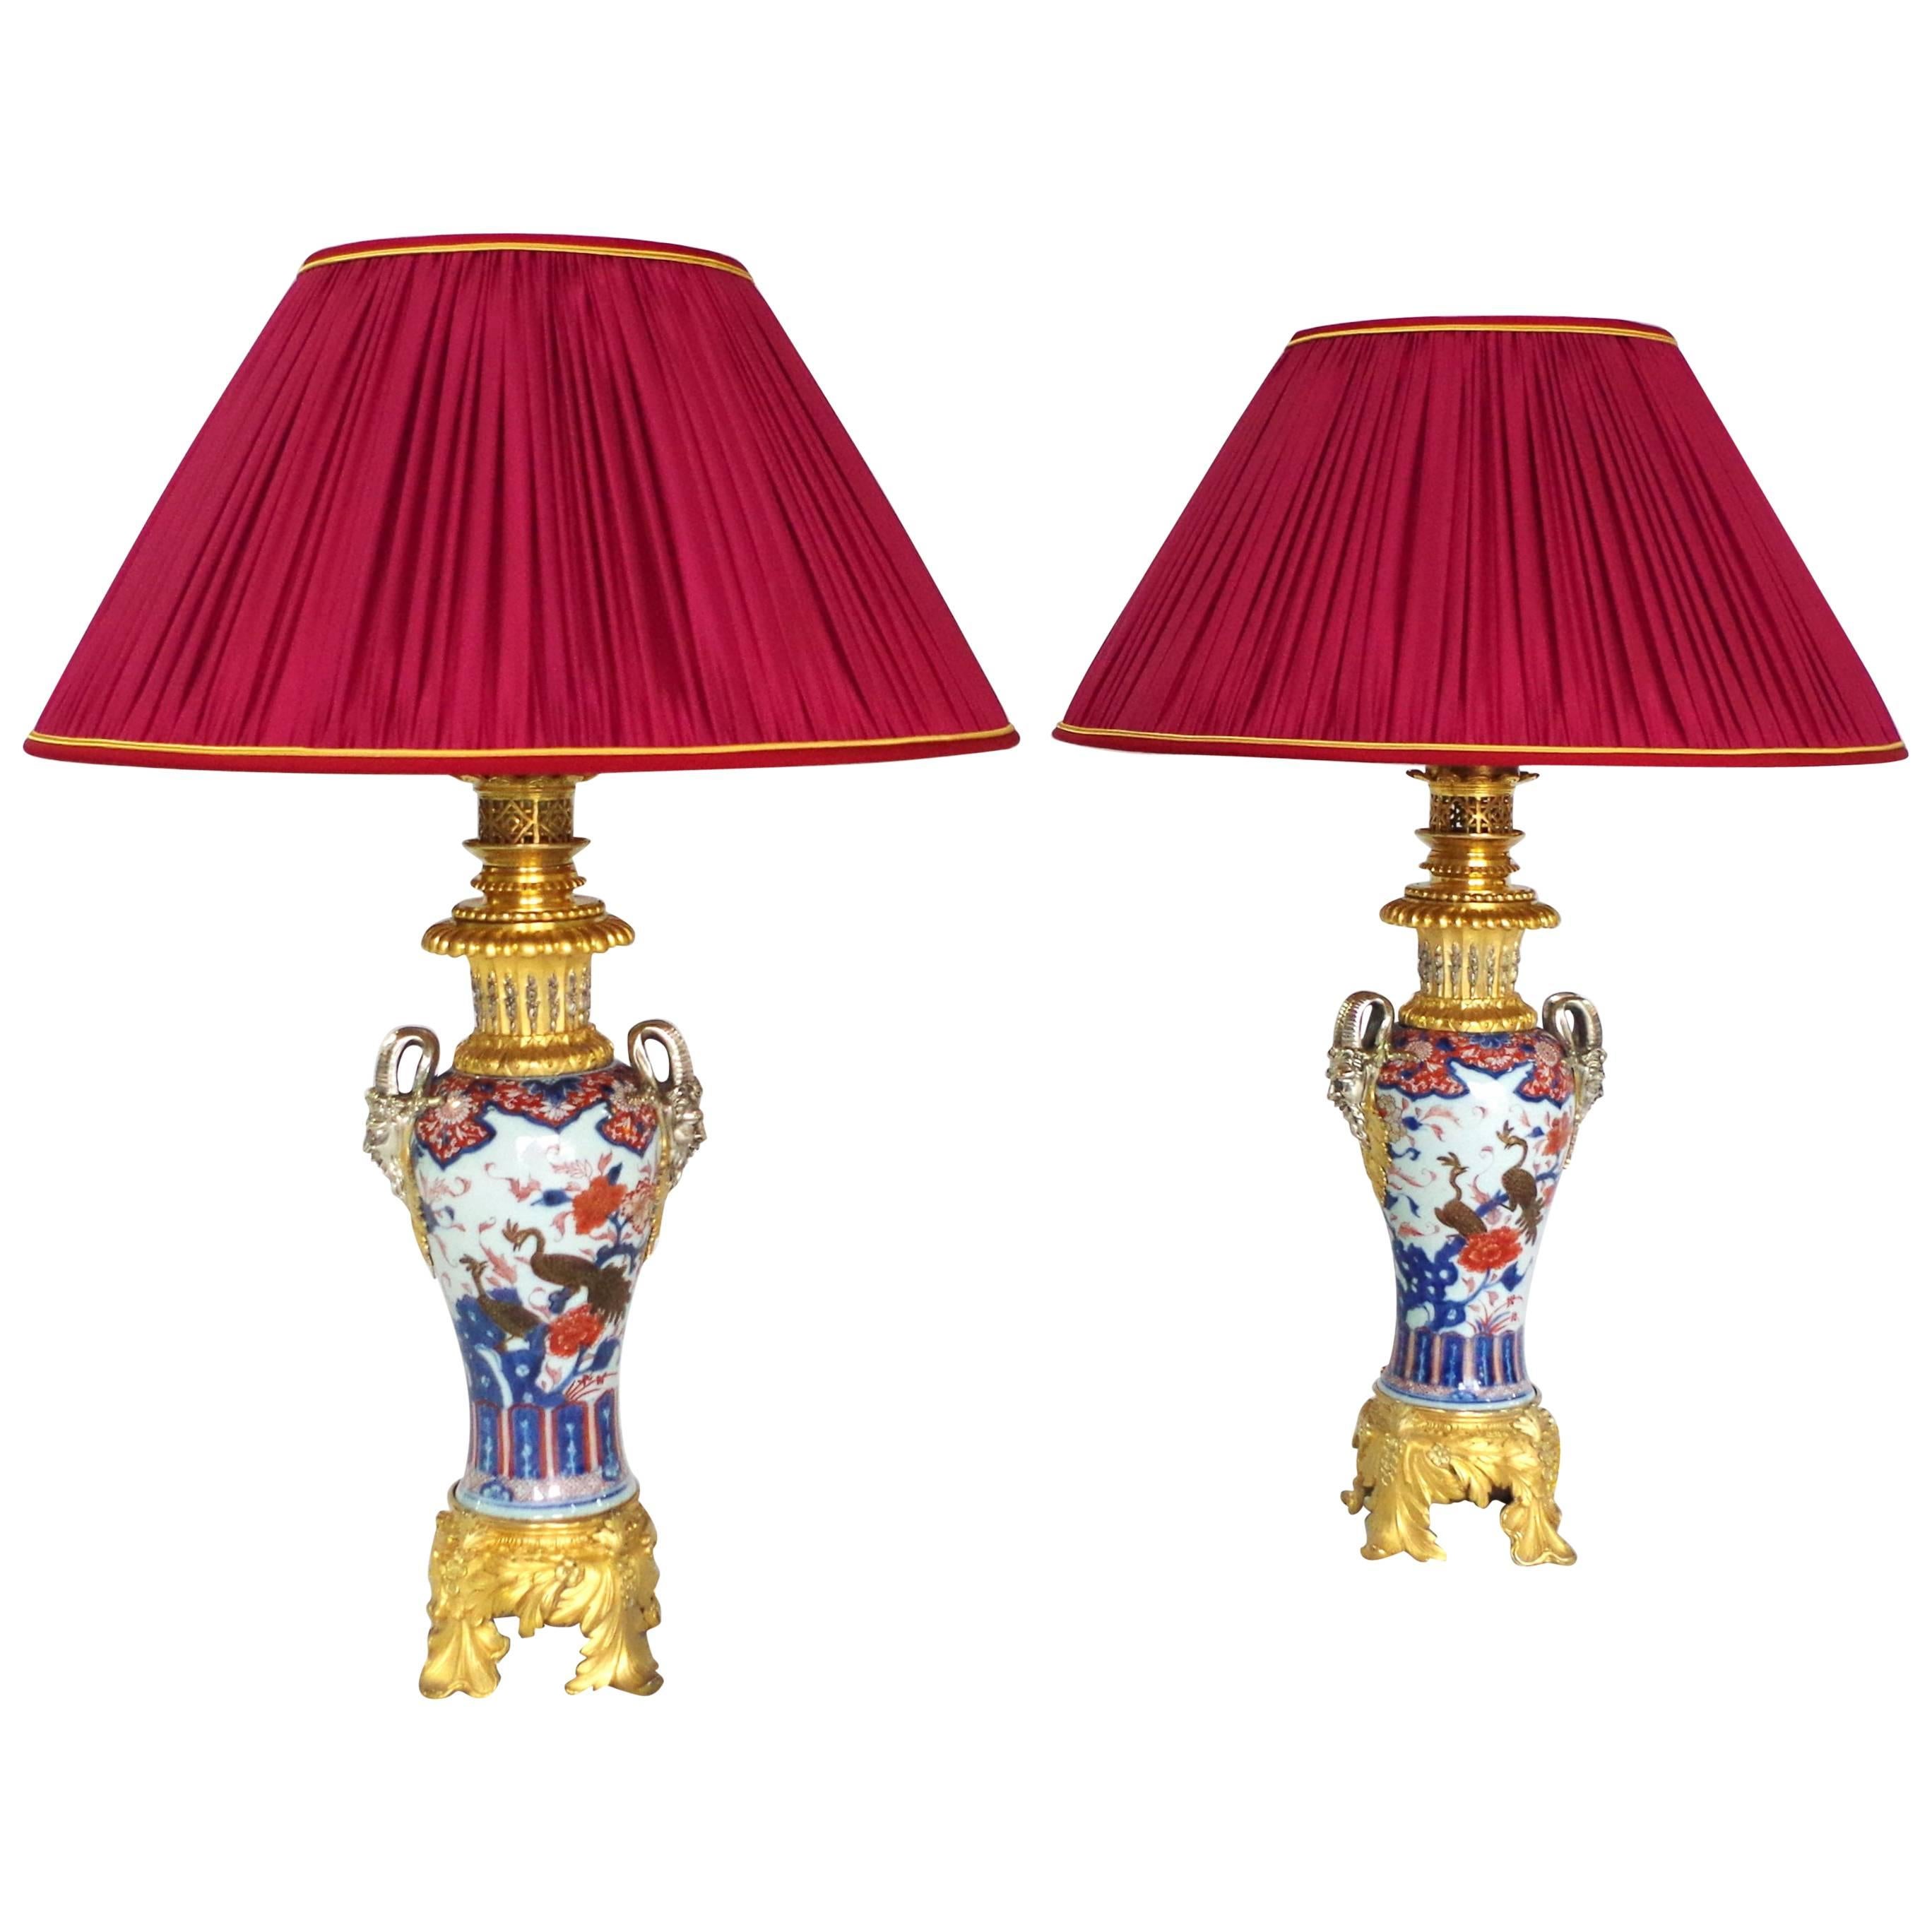 Large pair of Imari porcelain with peacocks lamps, 19th century